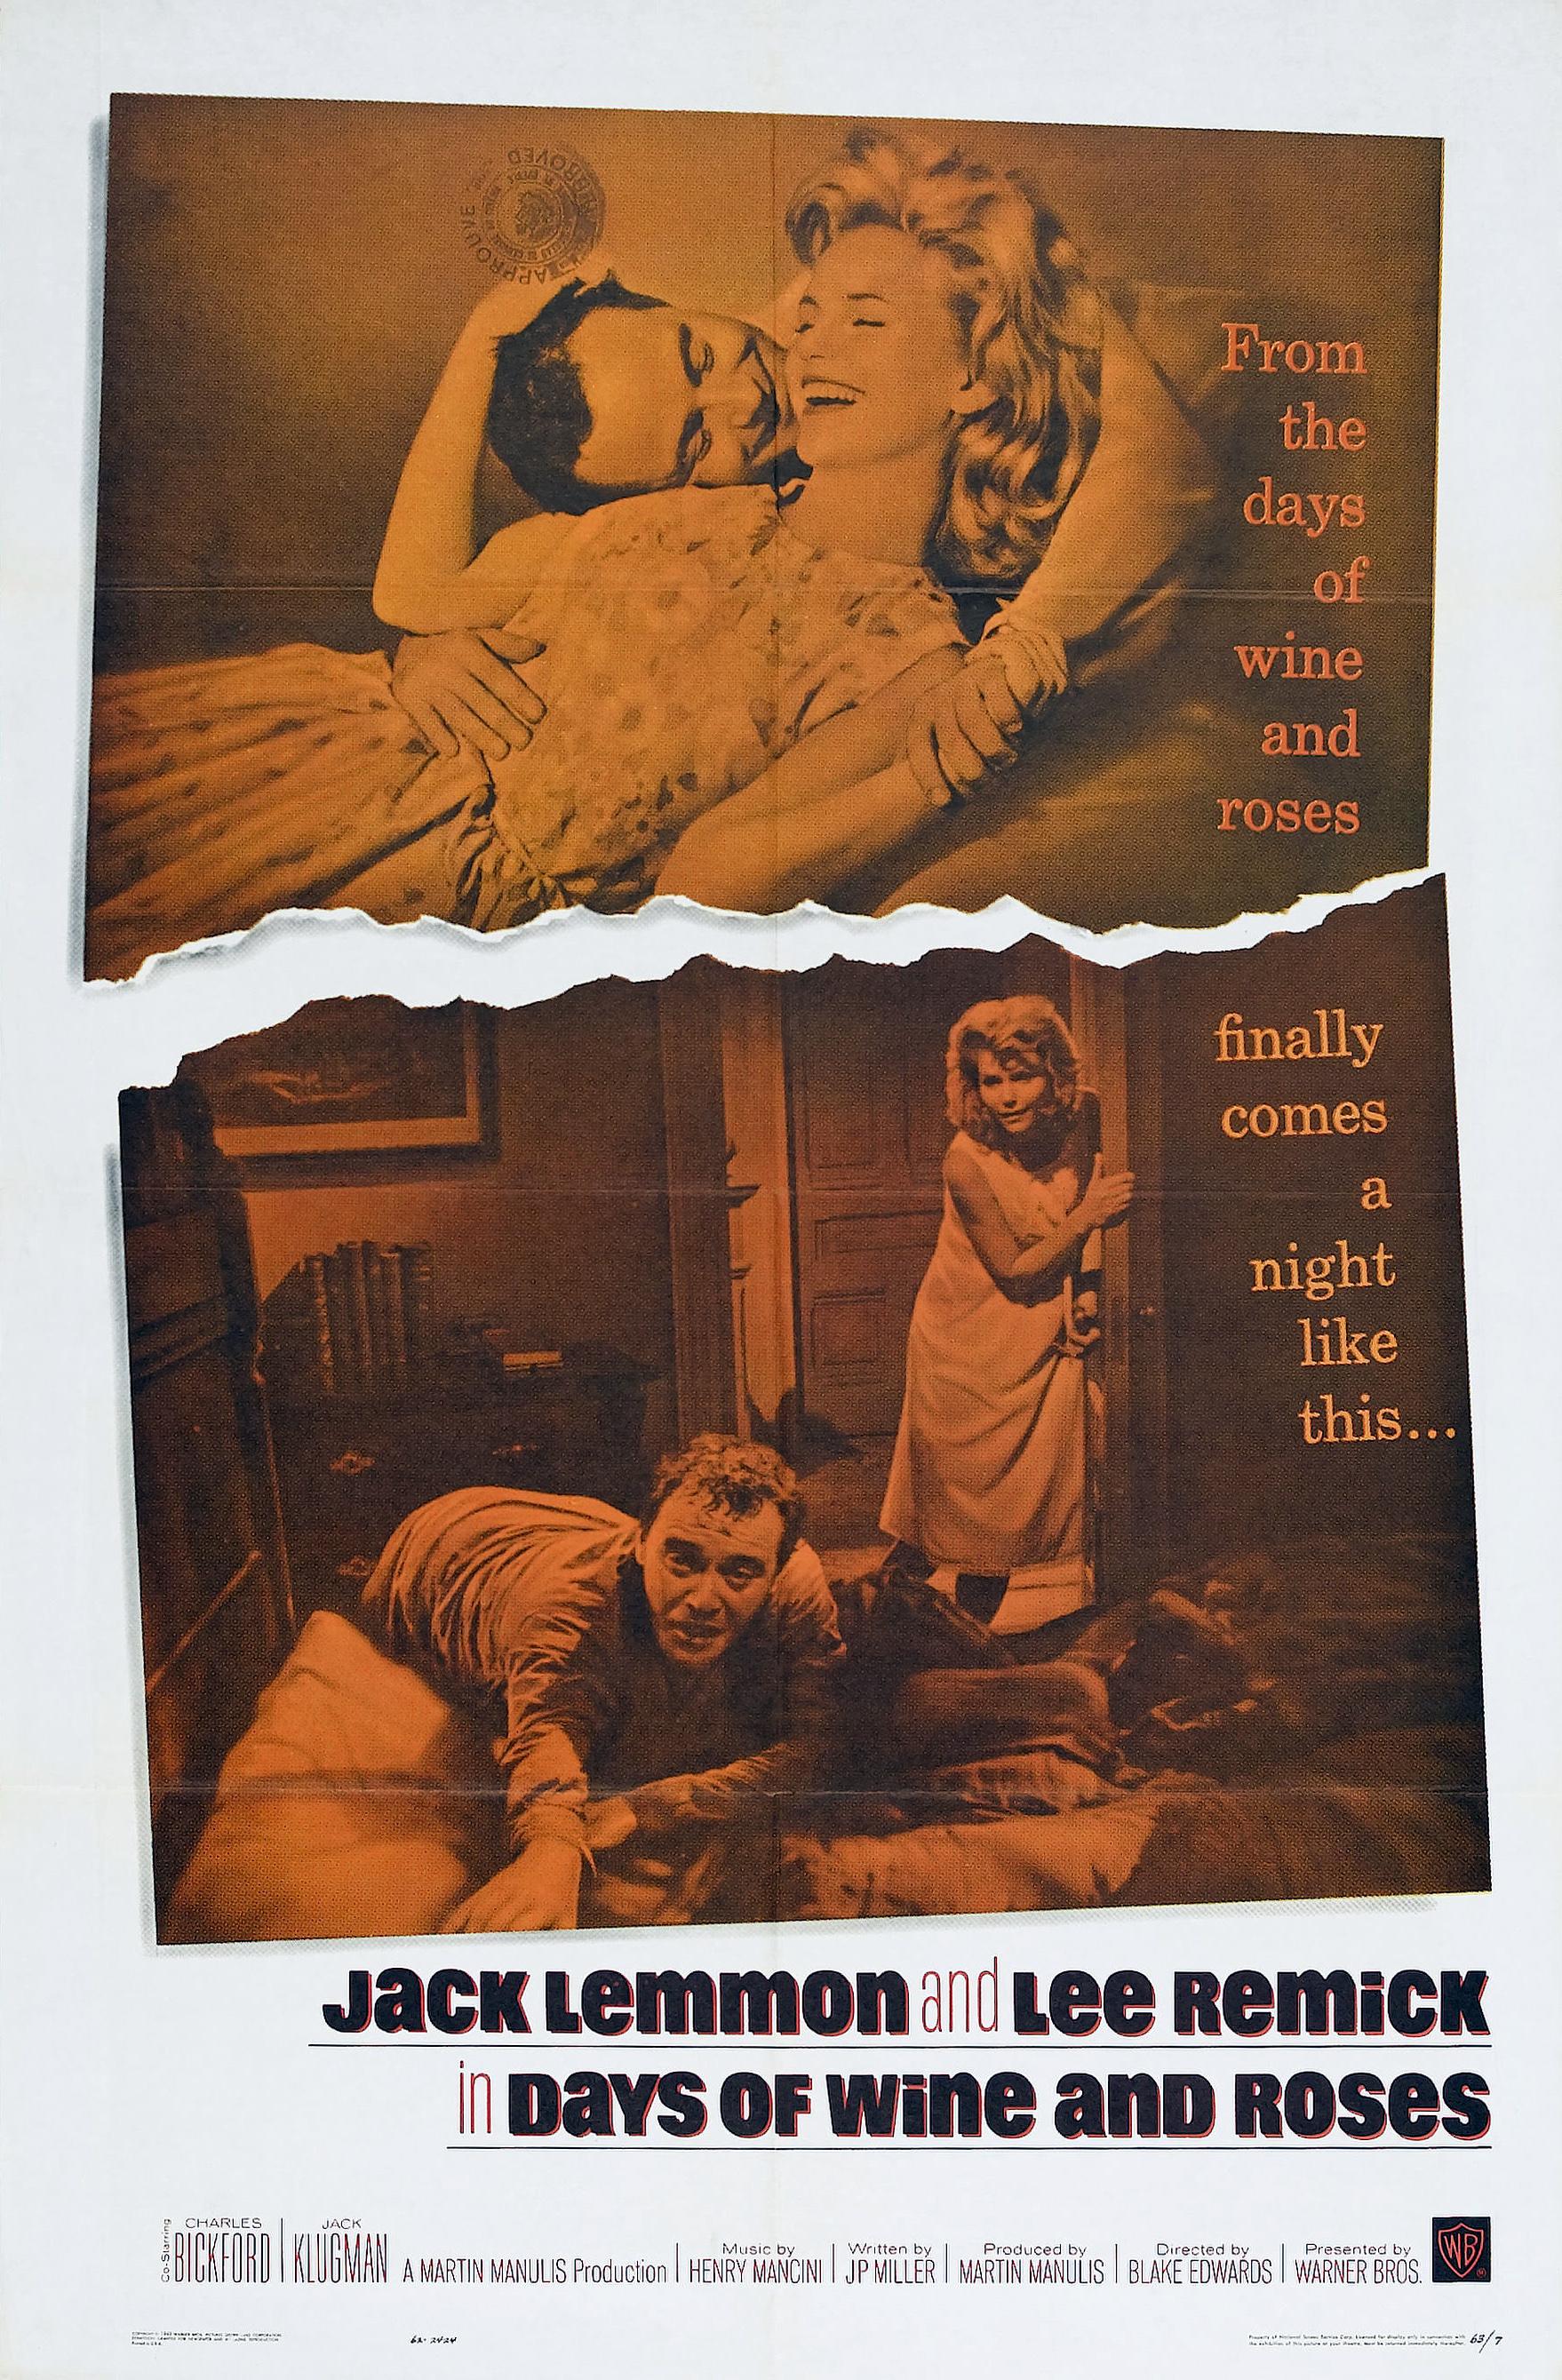 Movie poster for Days of Wine and Roses from 1962 with Jack Lemmon and Lee Remick